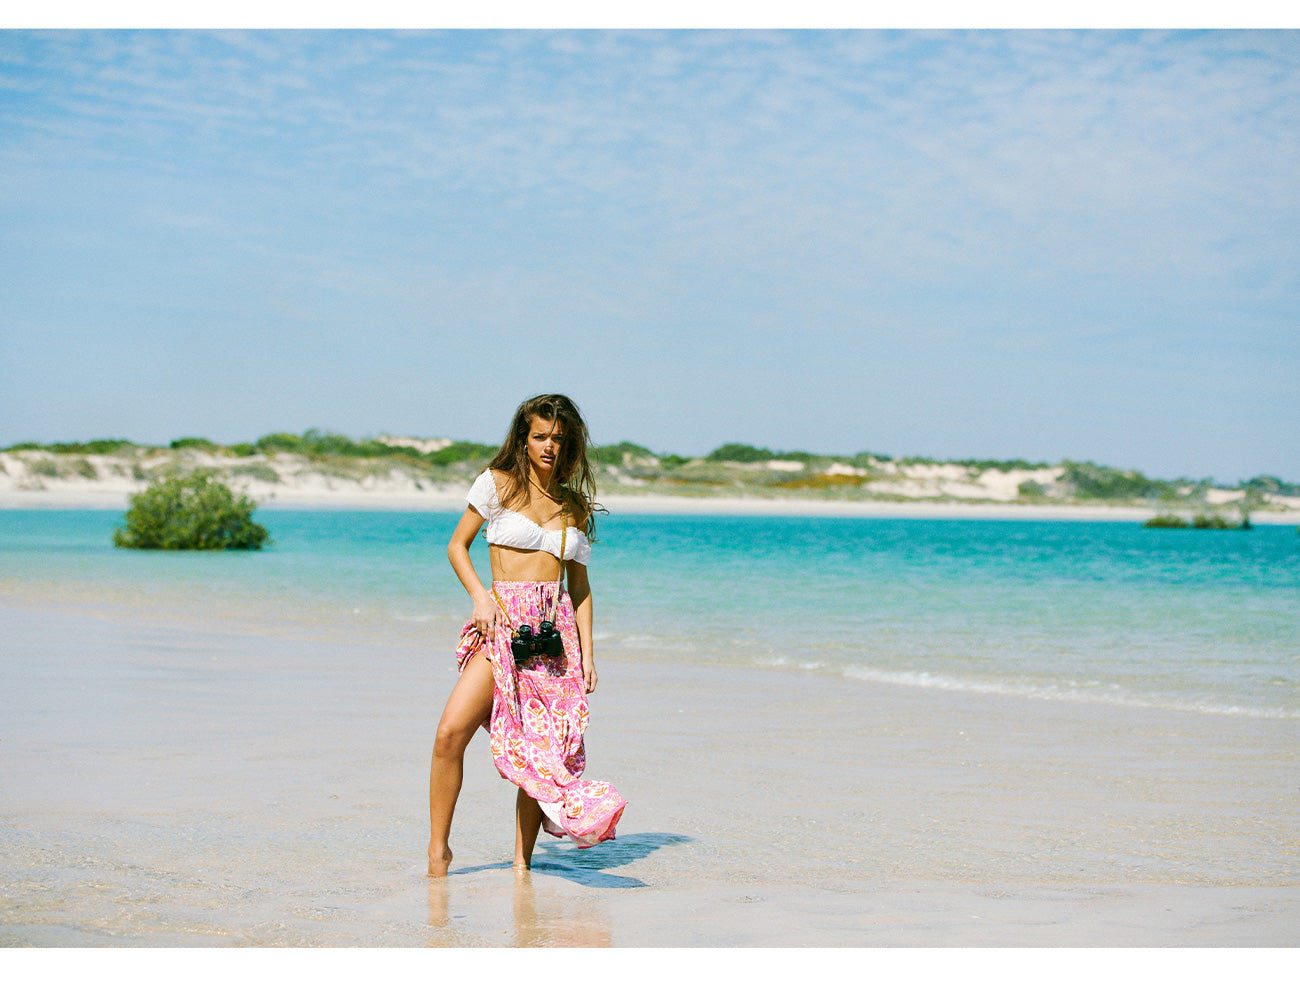 Forget Me Not the new sustainable fashion campaign shot at Cape Leveque, WA